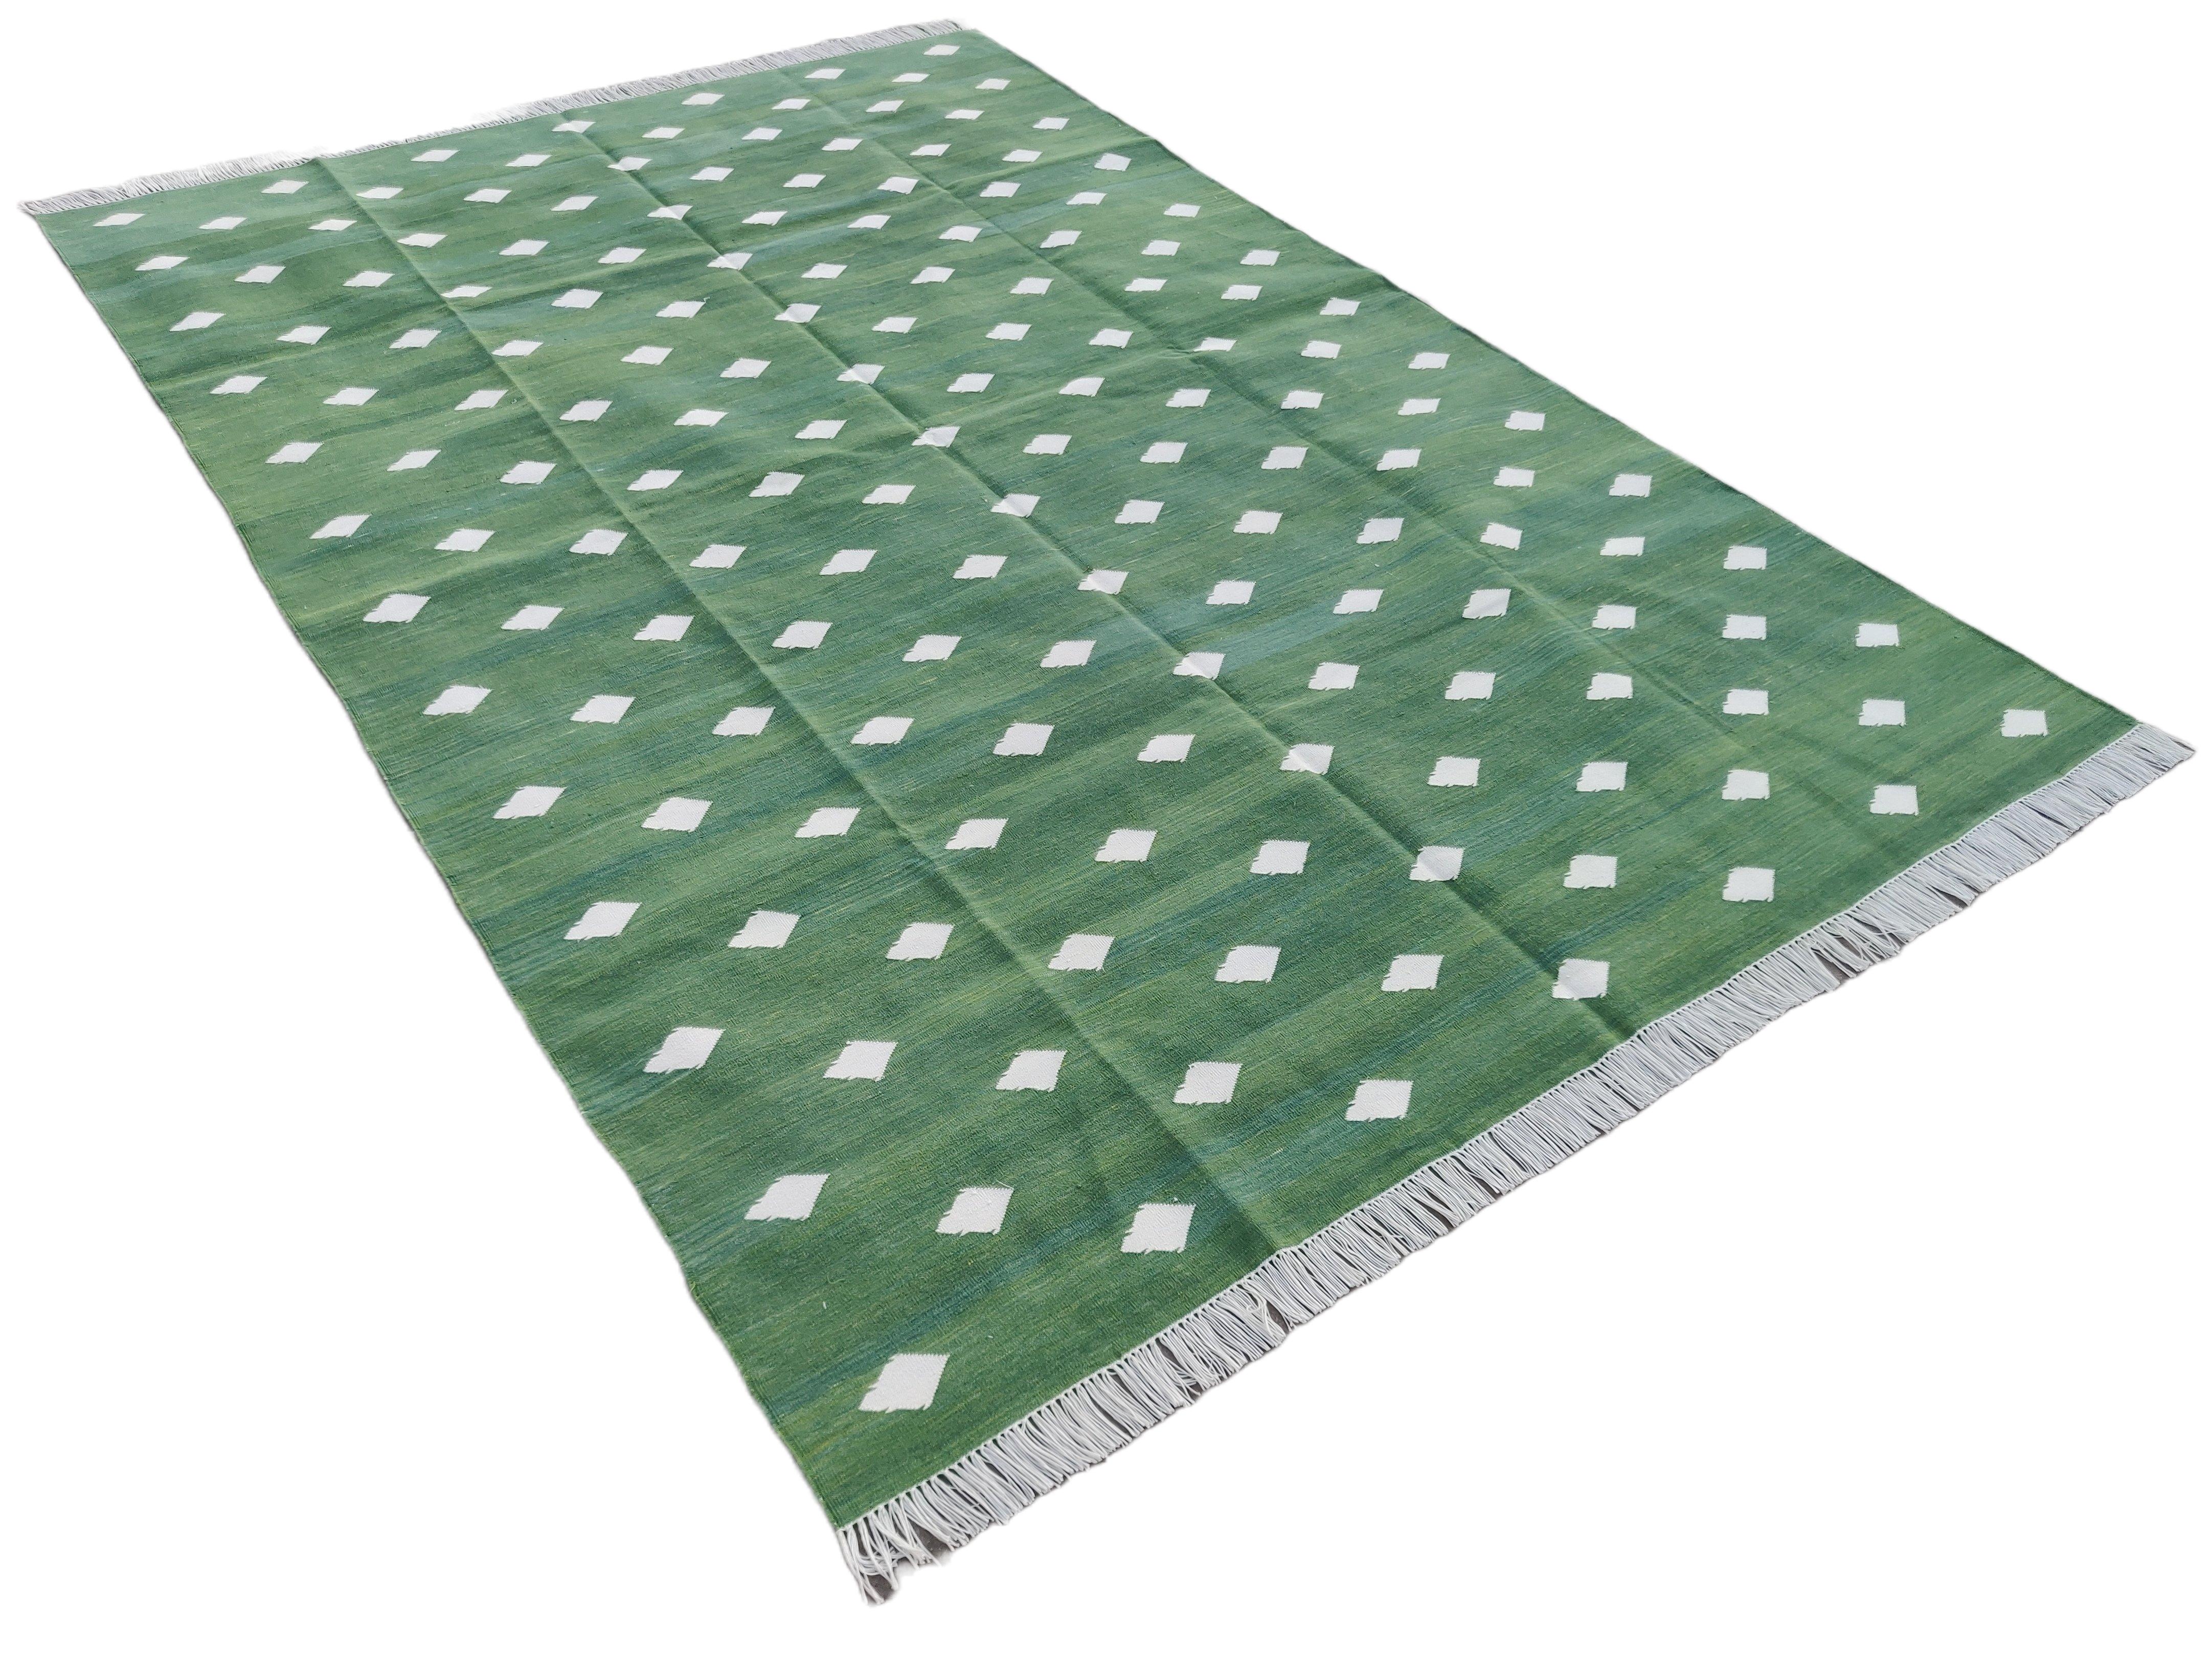 Handmade Cotton Natural Vegetable Dyed Rug, Forest Green And White Leaf Patterned Indian Dhurrie- 6'x9'
These special flat-weave dhurries are hand-woven with 15 ply 100% cotton yarn. Due to the special manufacturing techniques used to create our